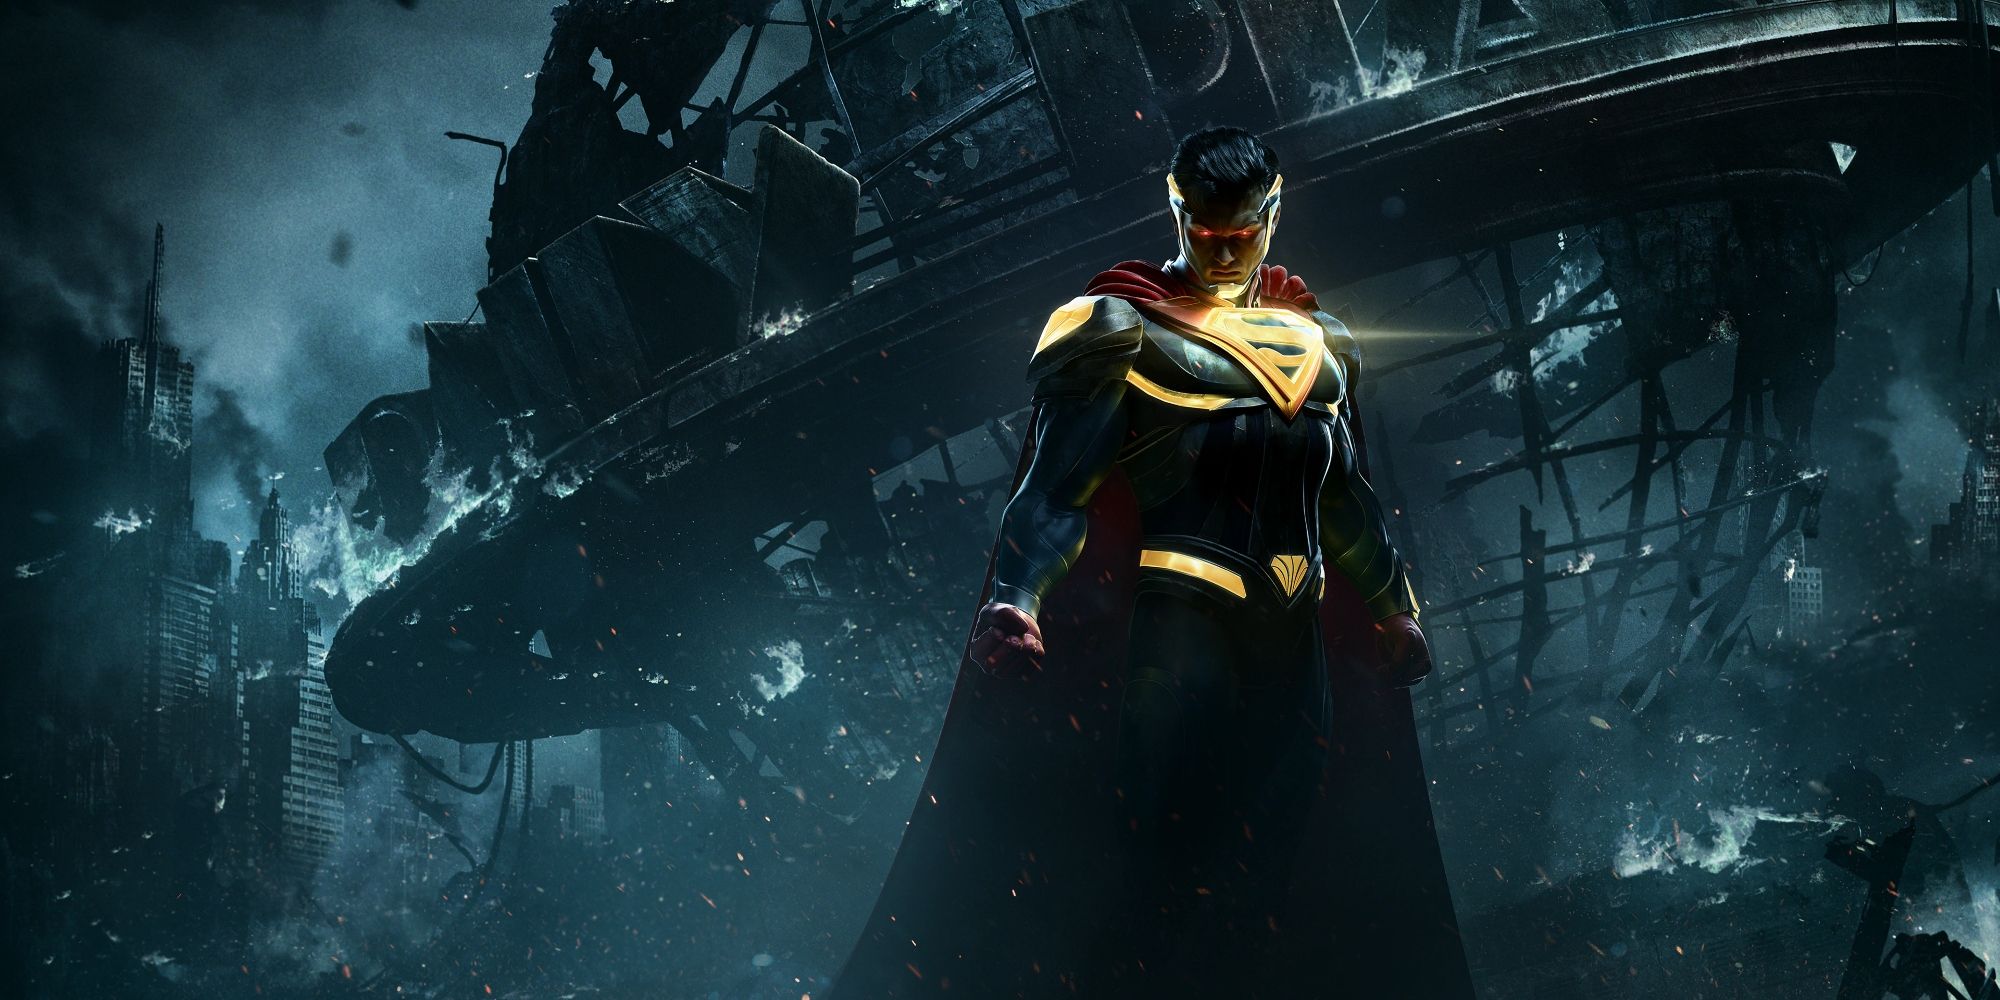 A glimpse of Superman from Injustice 2